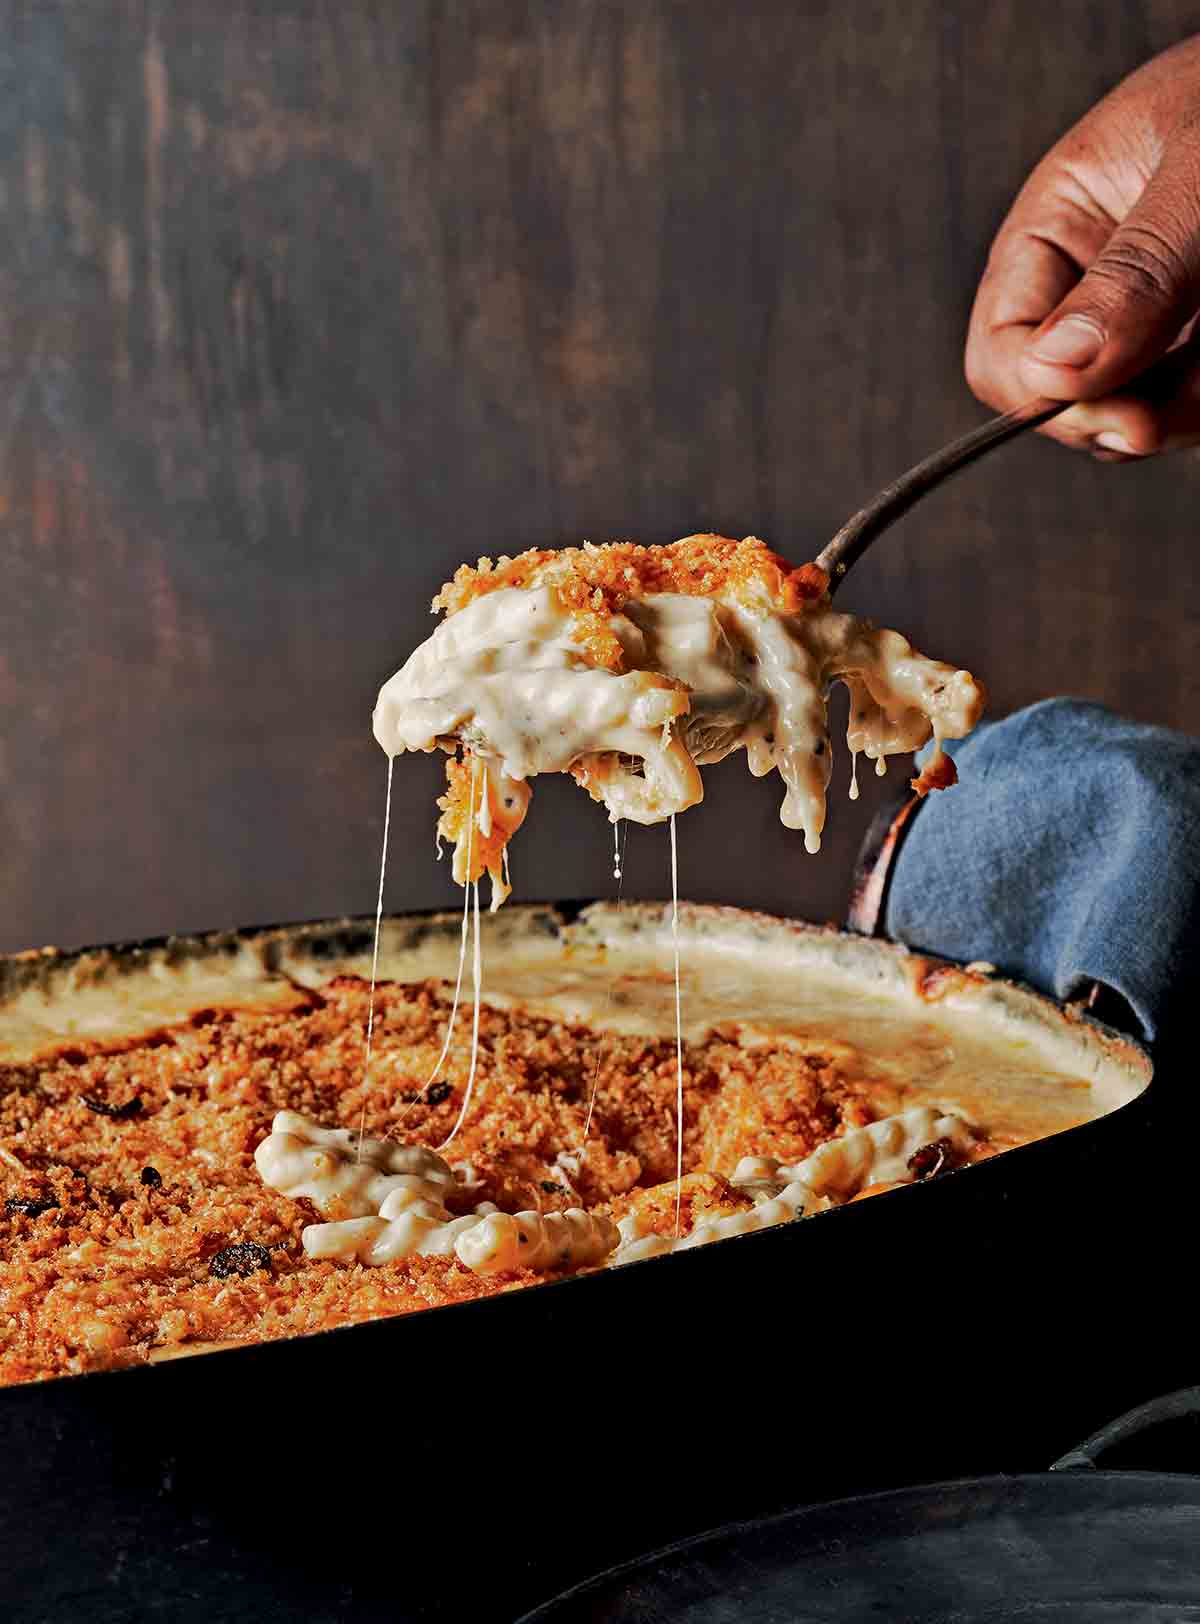 A scoop of creamy baked mac and cheese with crunchy topping being lifted from a casserole dish.